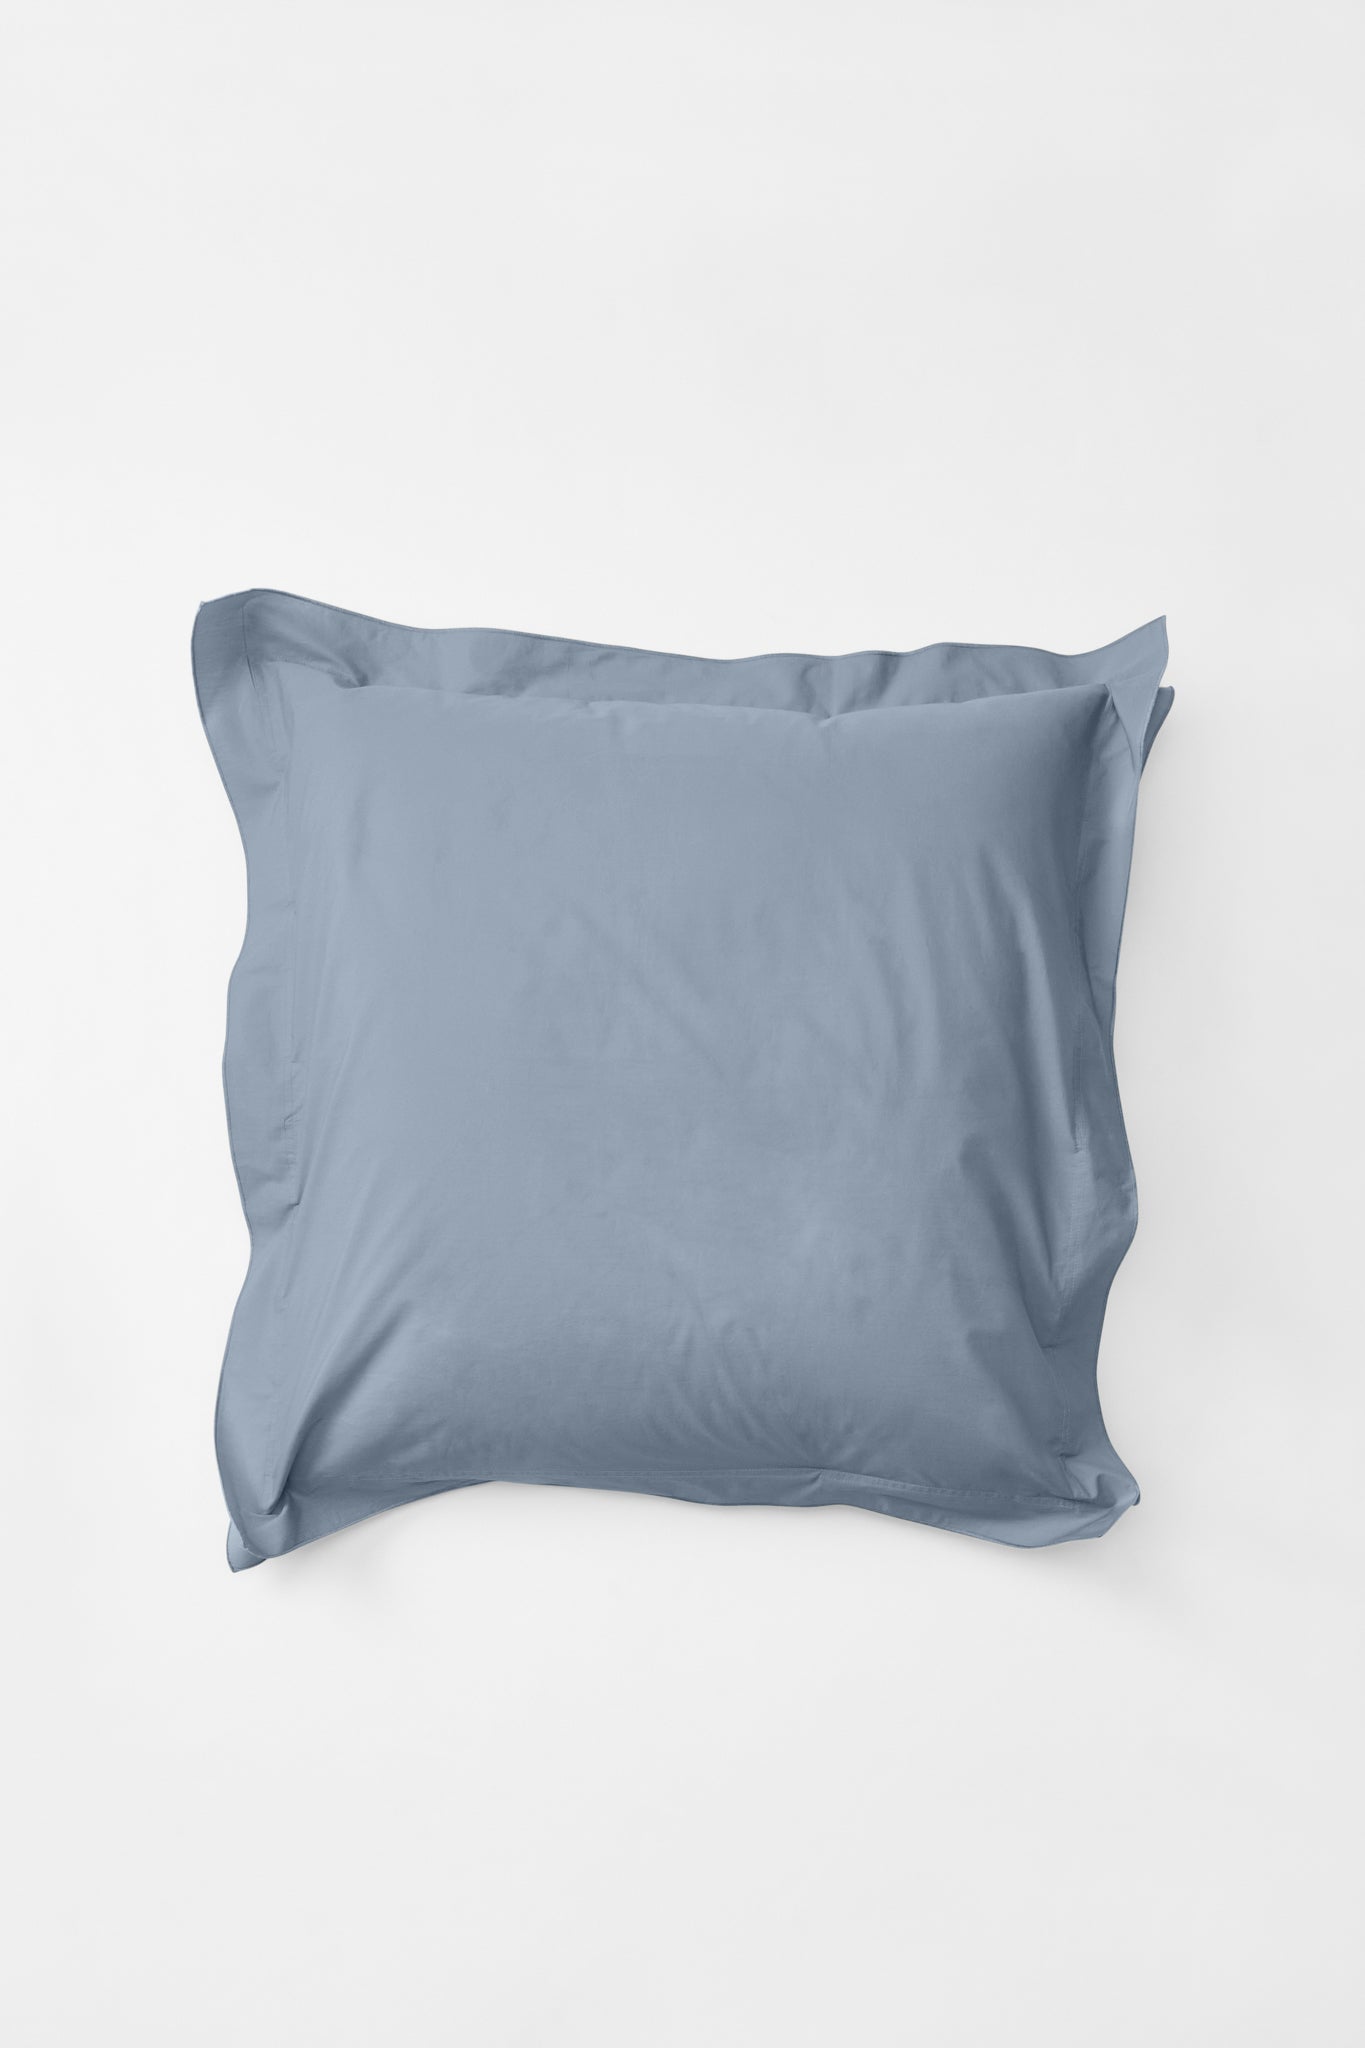 Aerial view of a 'Half Blue' euro pillow, gently ruffled at the edges.